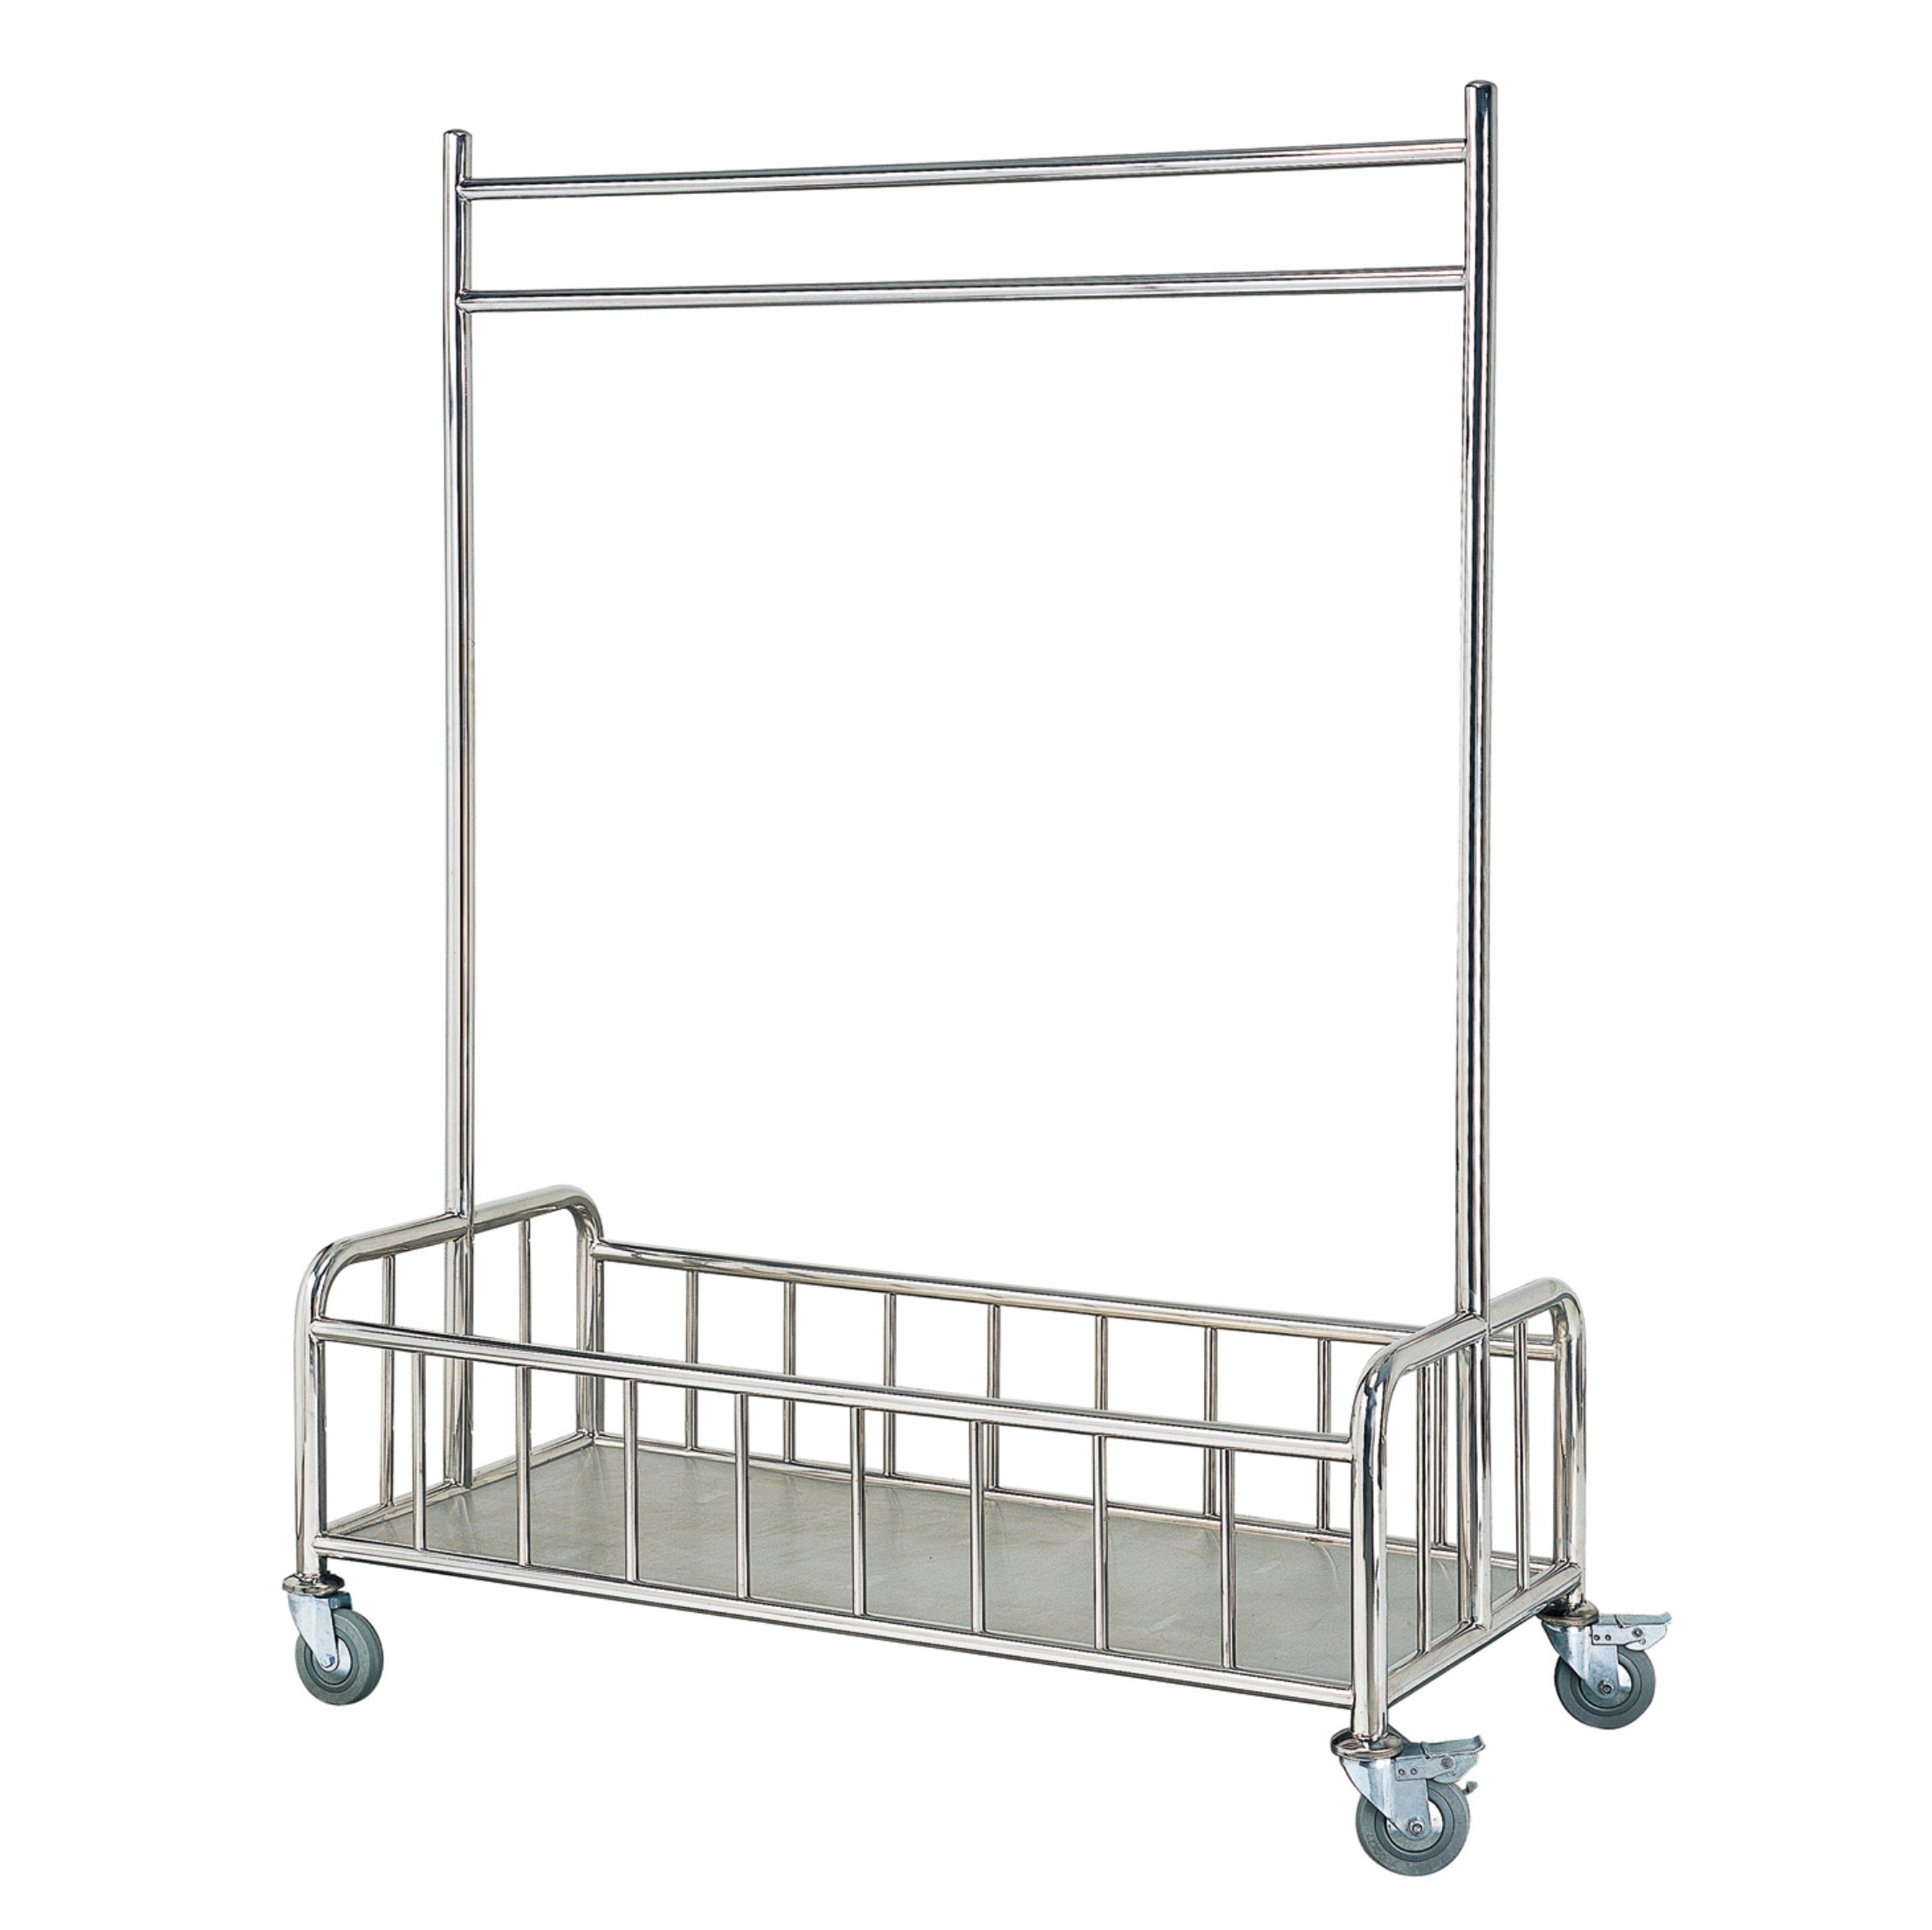 Stainless Steel Rack for Hotel Lobby (XL-13)